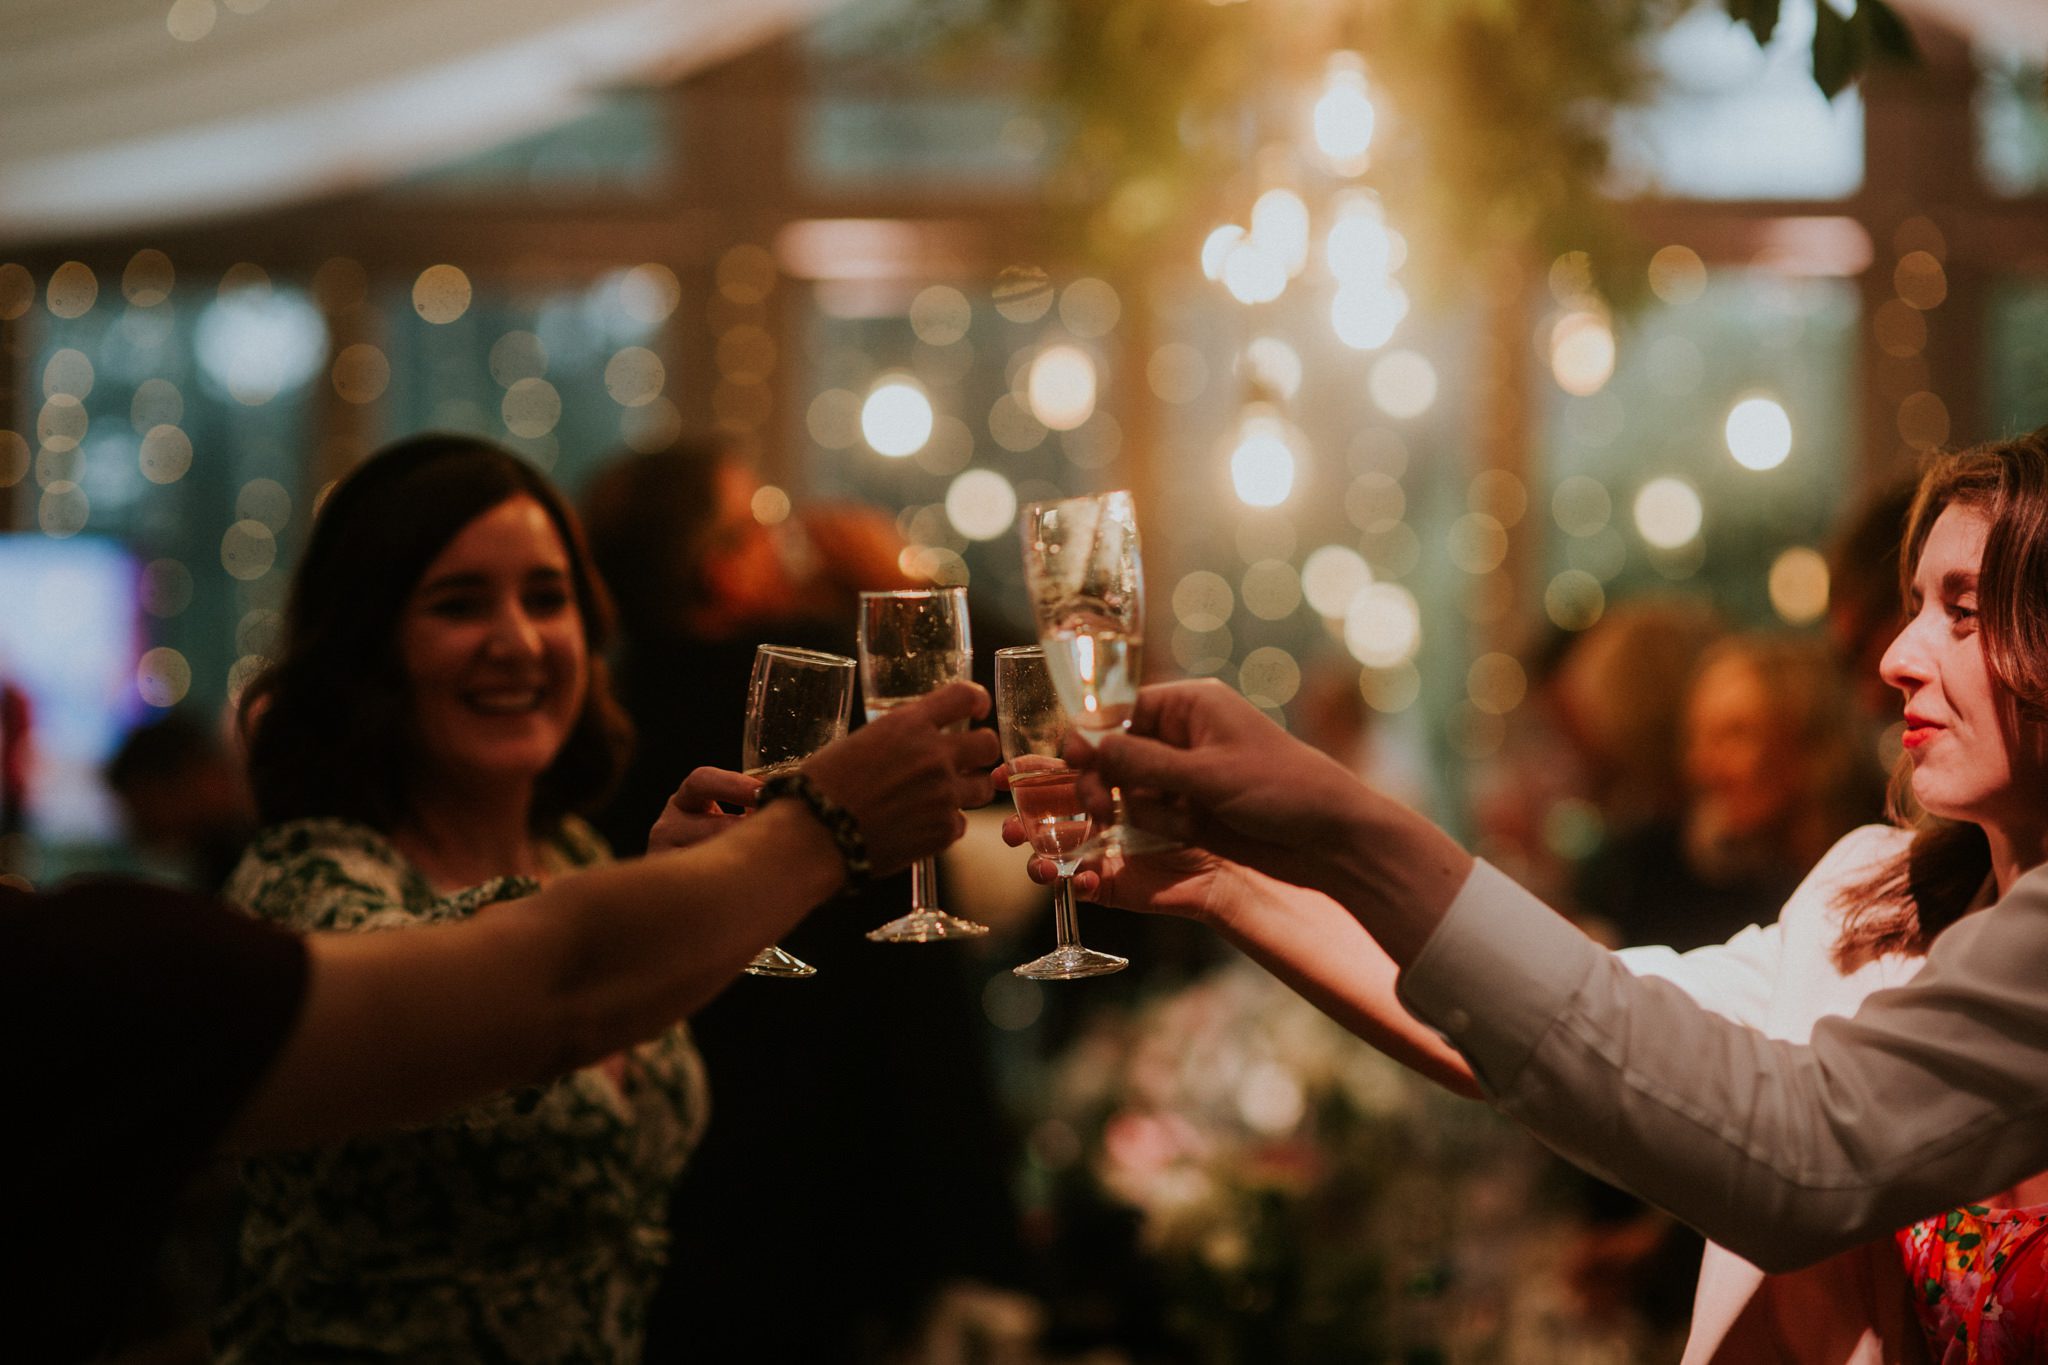 Happy guests toast the bride and groom during wedding reception at Trevenna Barns in Cornwall